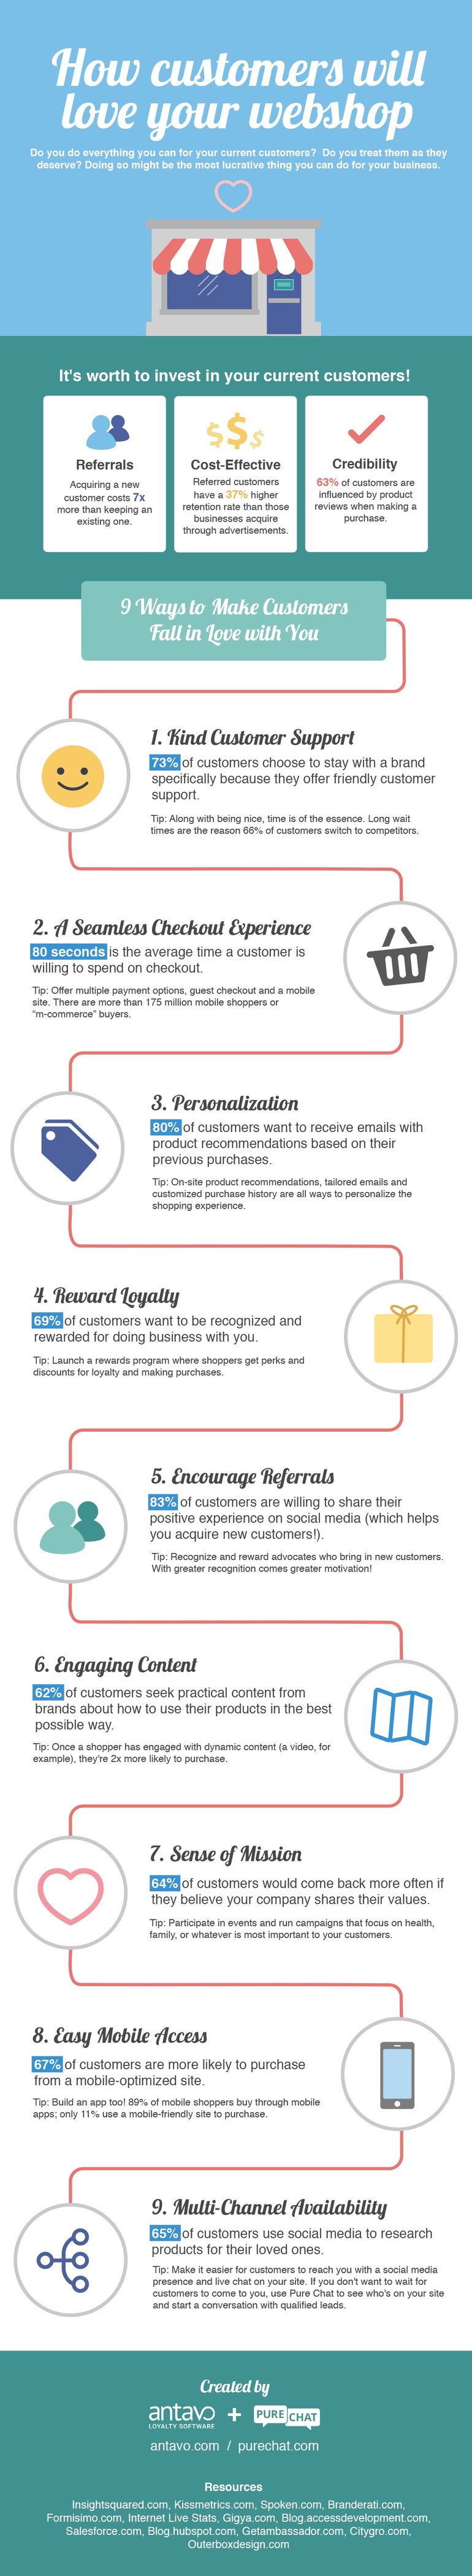 How_customers_will_love_your_webshop_infographic_antavo_purechat_full.jpg